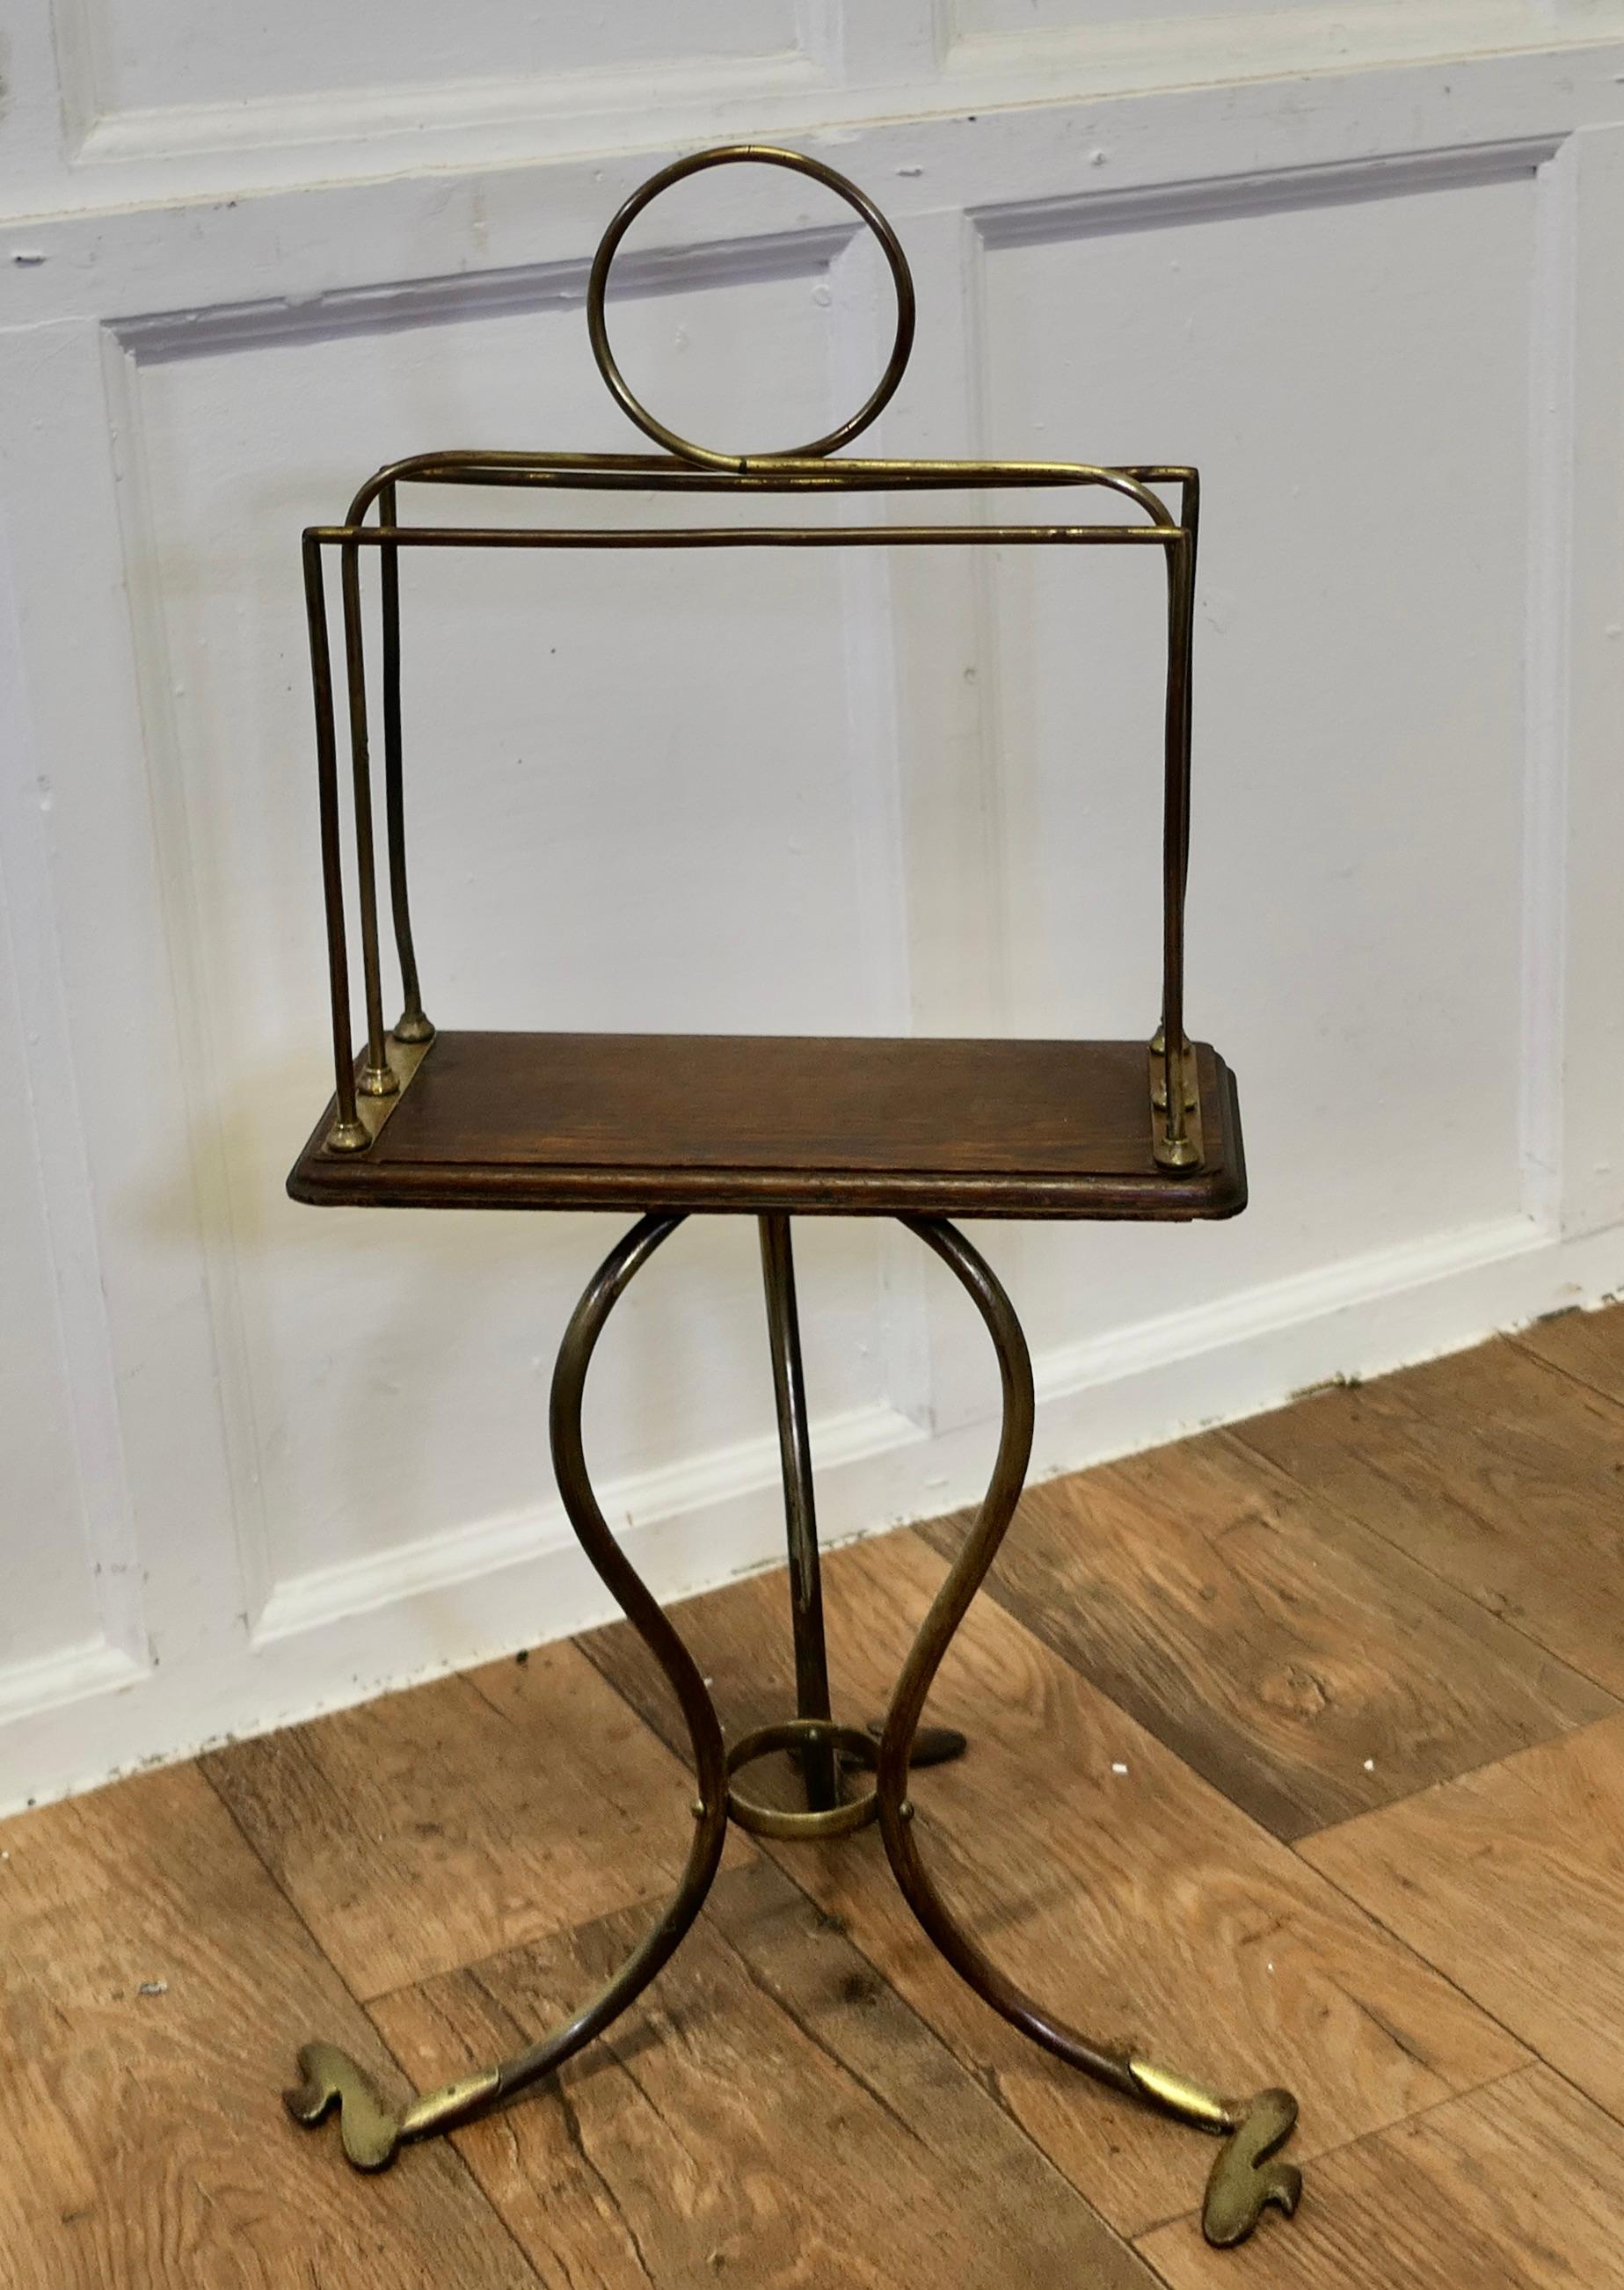 Stylish Victorian Golden Oak and Brass Revolving Magazine Rack

This is a attractive brass magazine rack it is set onto an Oak base which sits on a three legged brass stand 
The Rack spins easily on the stand and is in good antique condition 

The